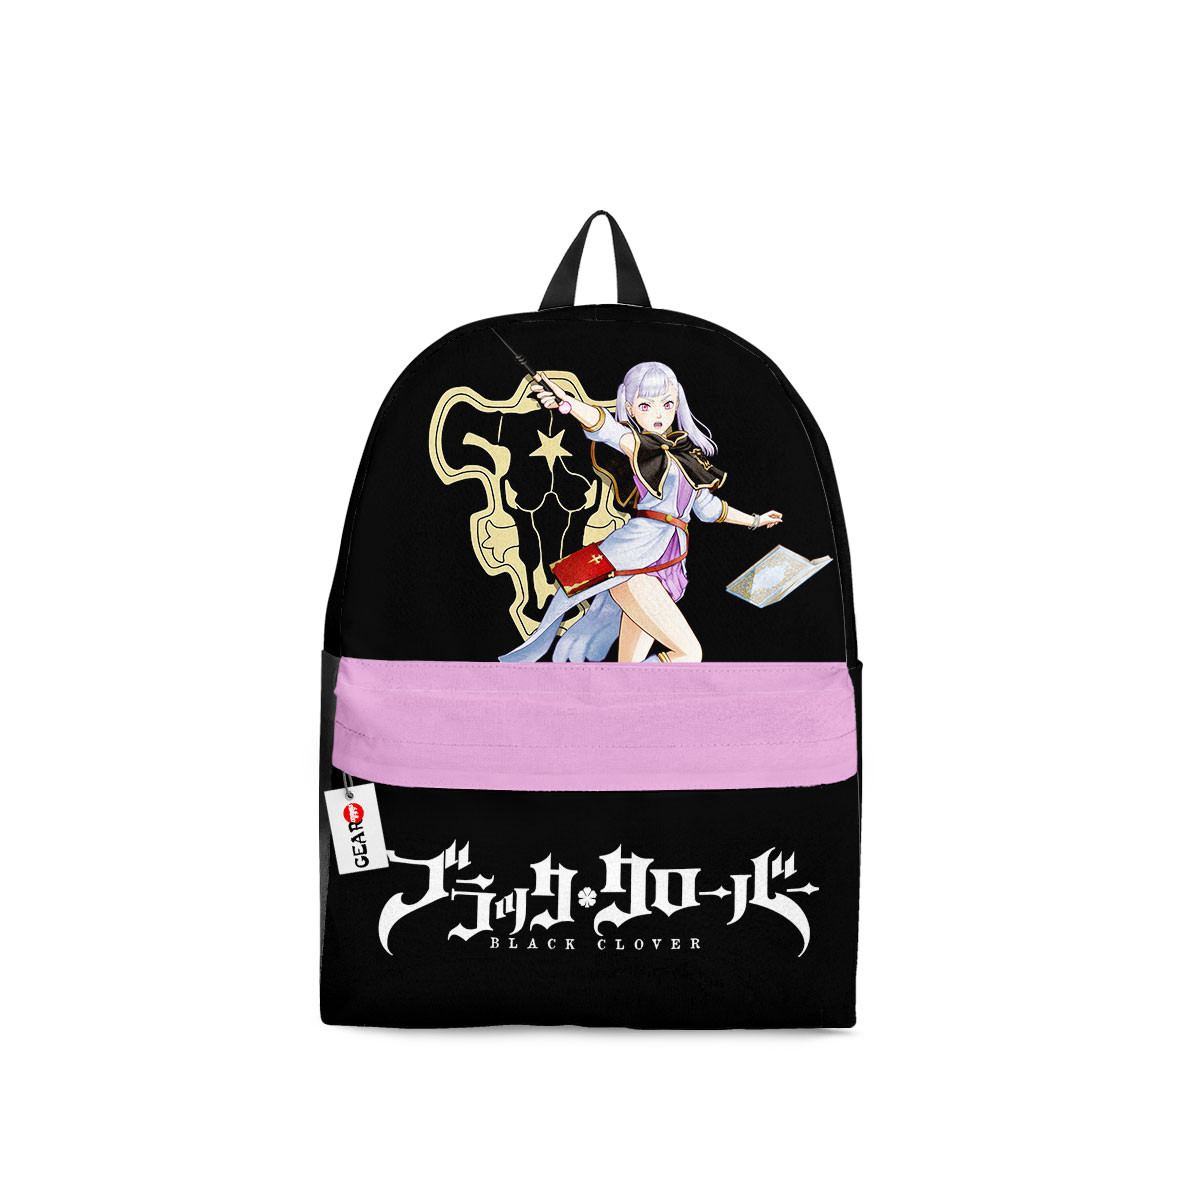 Latest Anime style products 125